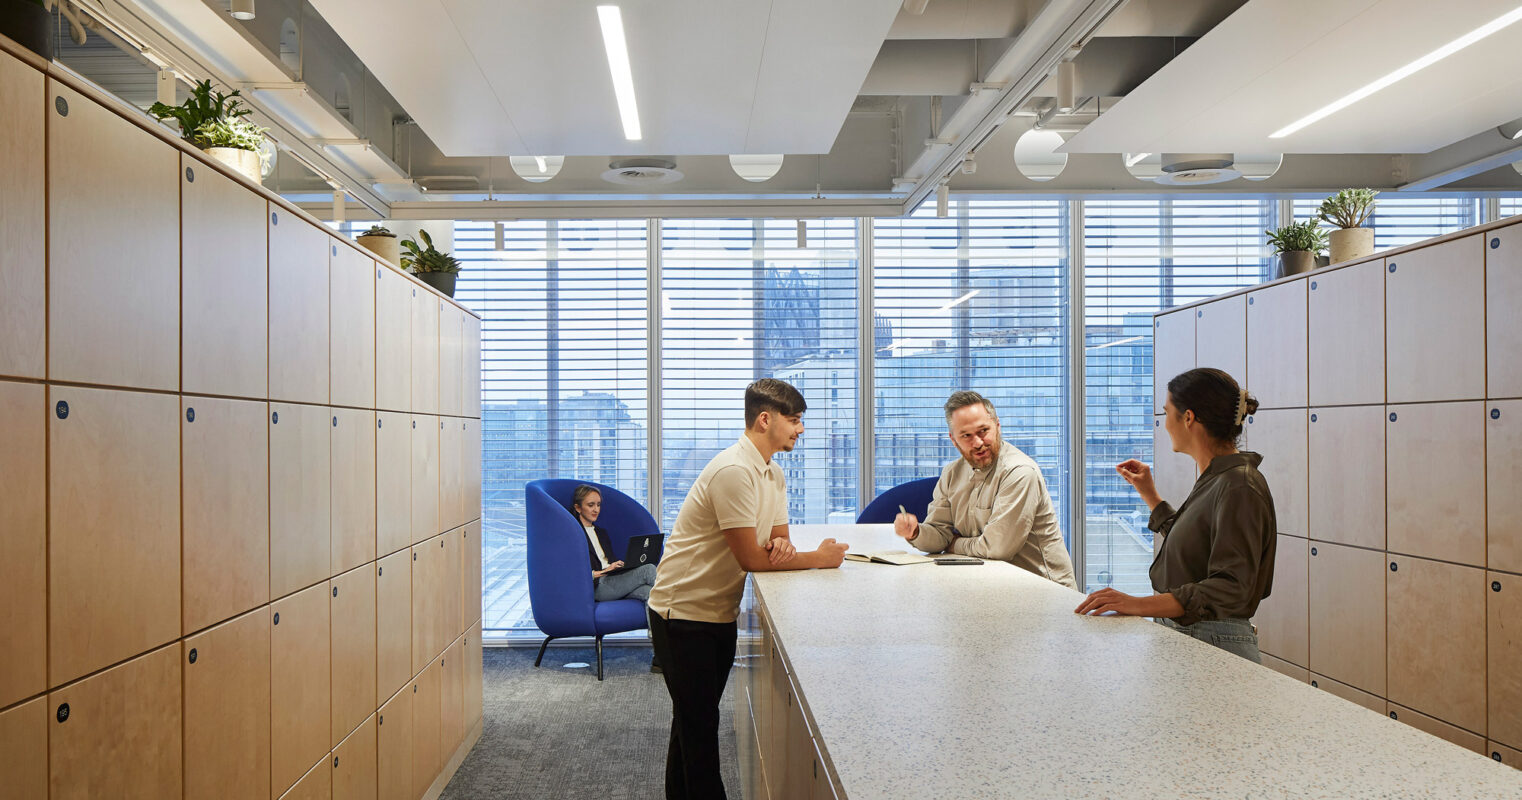 Modern office space showcasing neutral wood lockers, terrazzo-style countertops, and recessed lighting. Three professionals engage in a discussion over documents at the central white table, adding a sense of collaboration to the clean, structured environment.